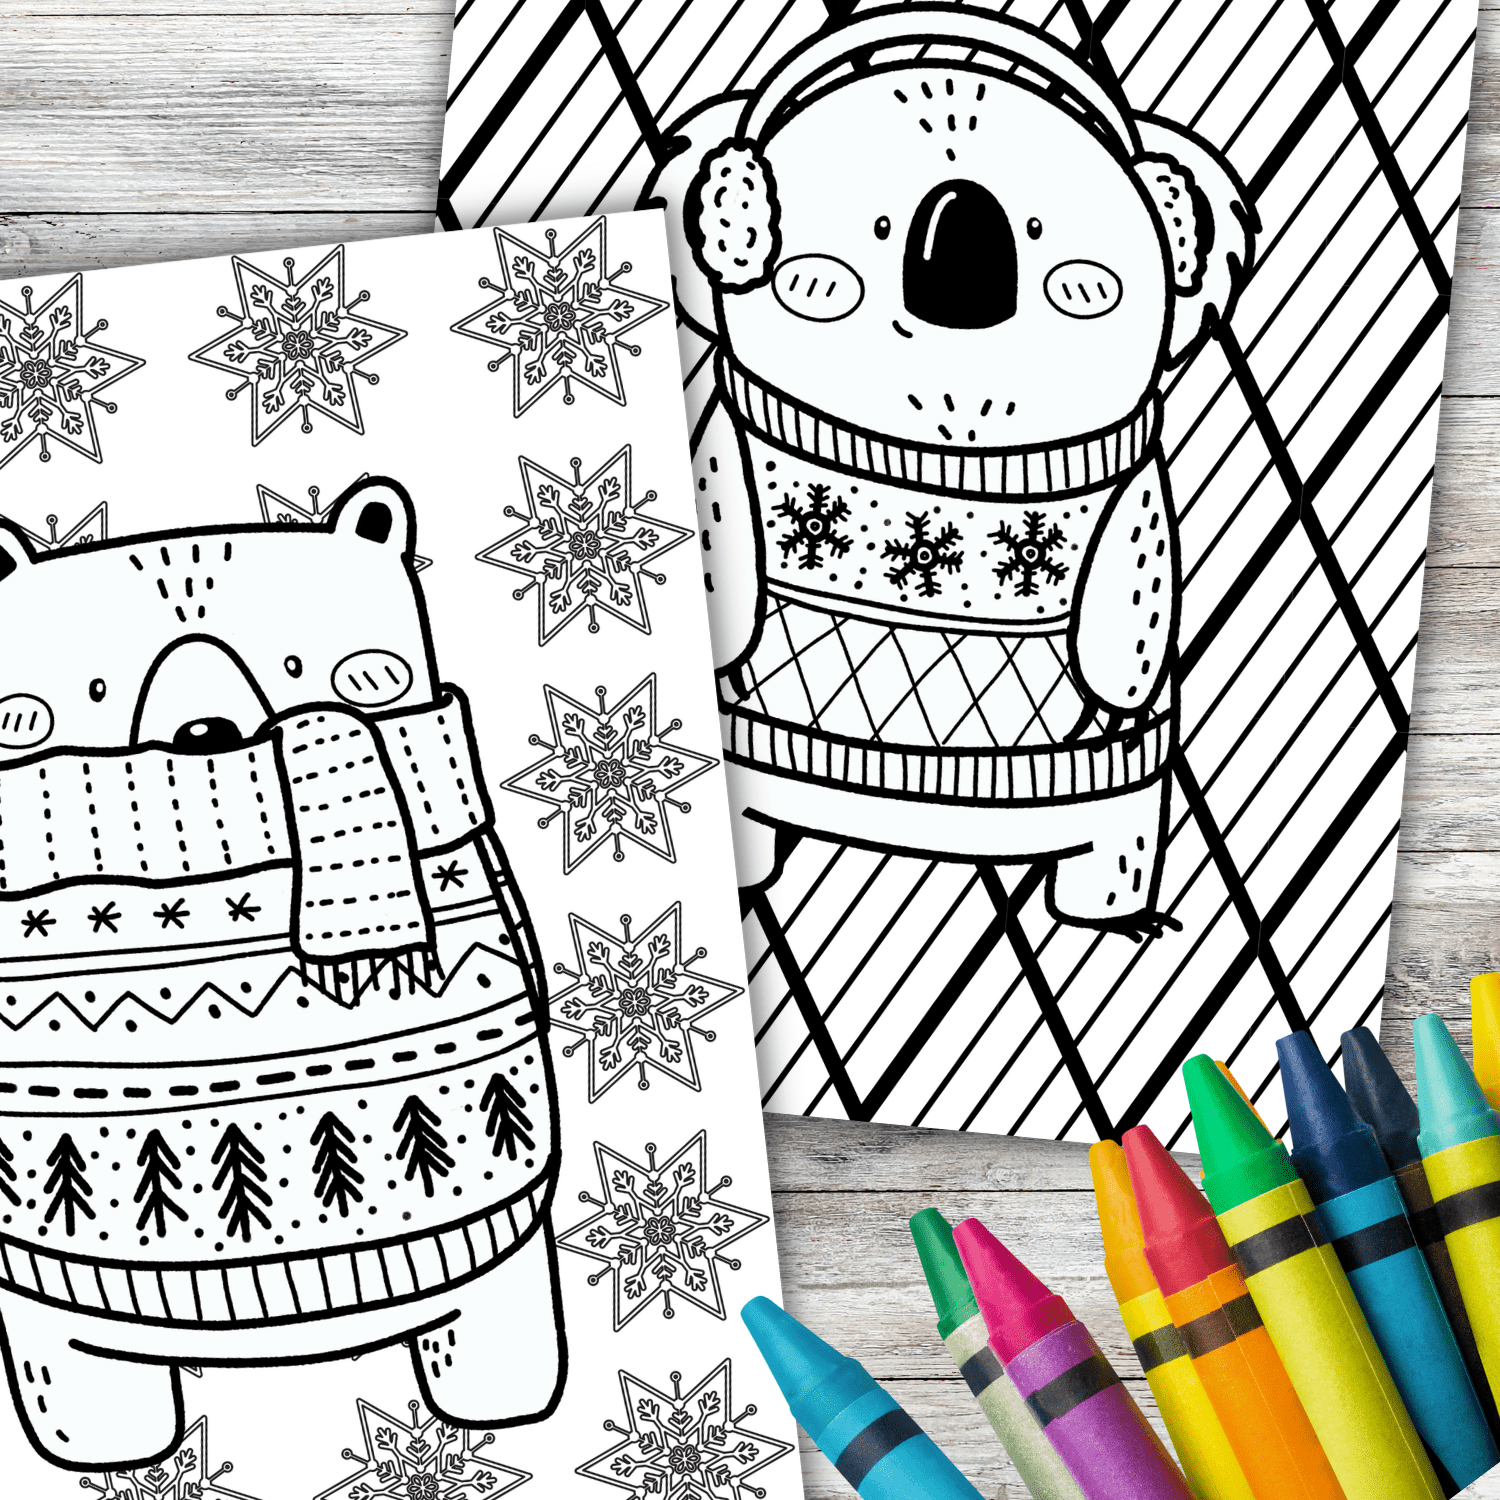 Winter animal coloring pages free â in the bag kids crafts